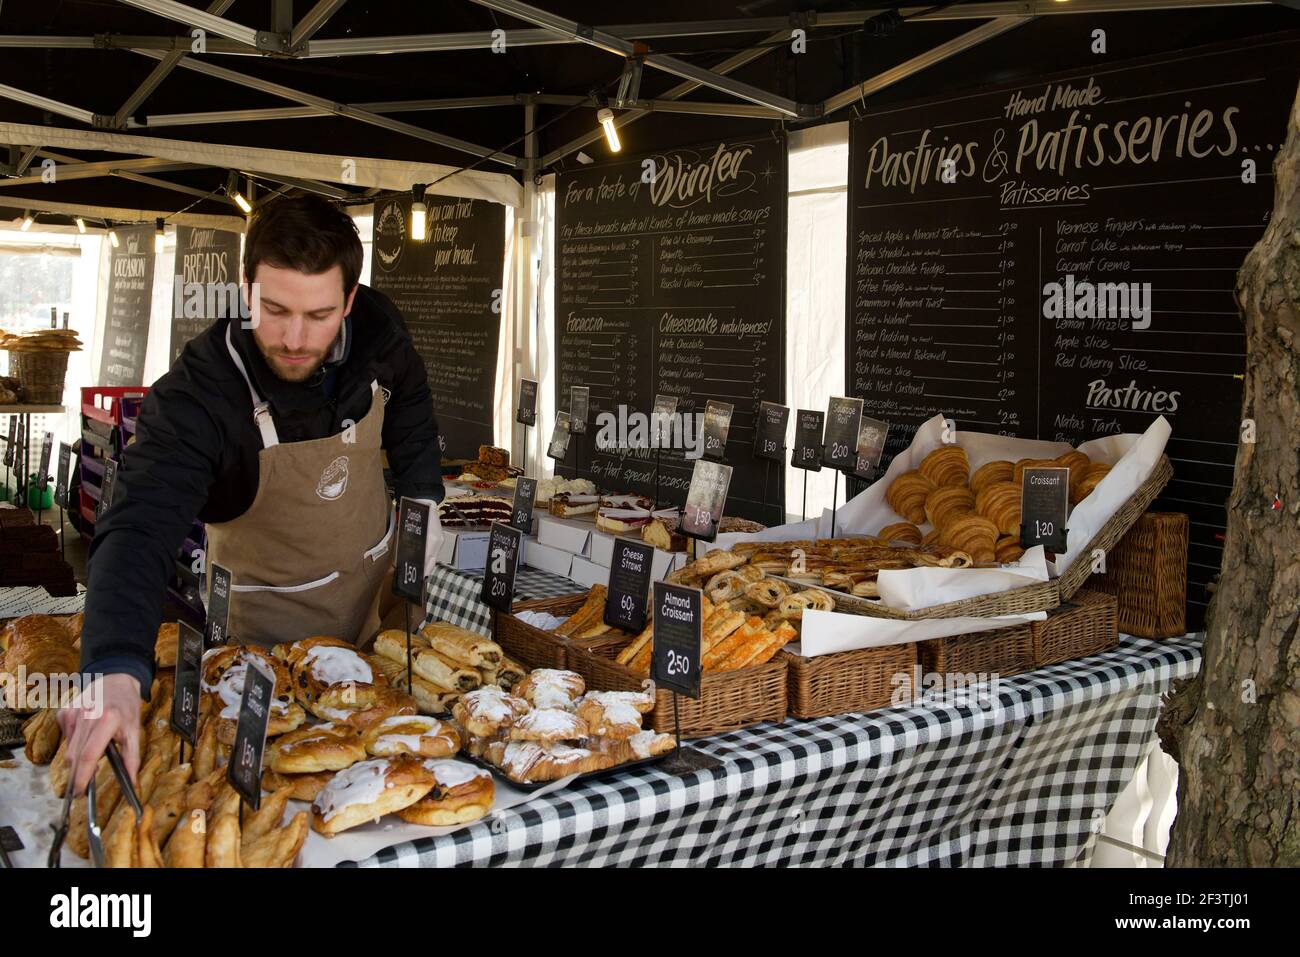 Pastries and Patisseries at Farmers Market Stock Photo